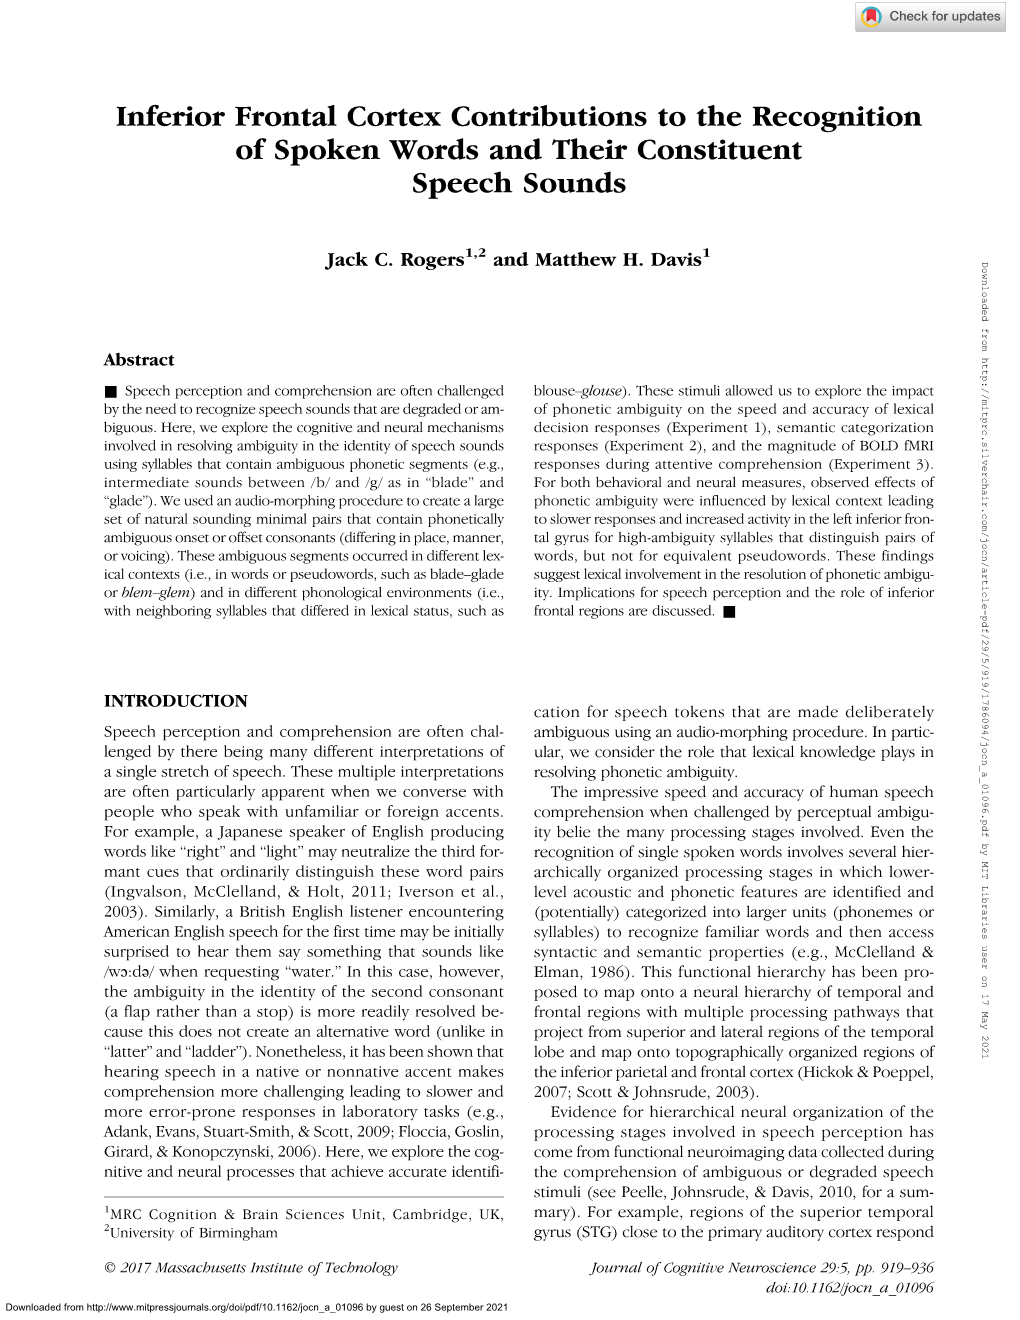 Inferior Frontal Cortex Contributions to the Recognition of Spoken Words and Their Constituent Speech Sounds